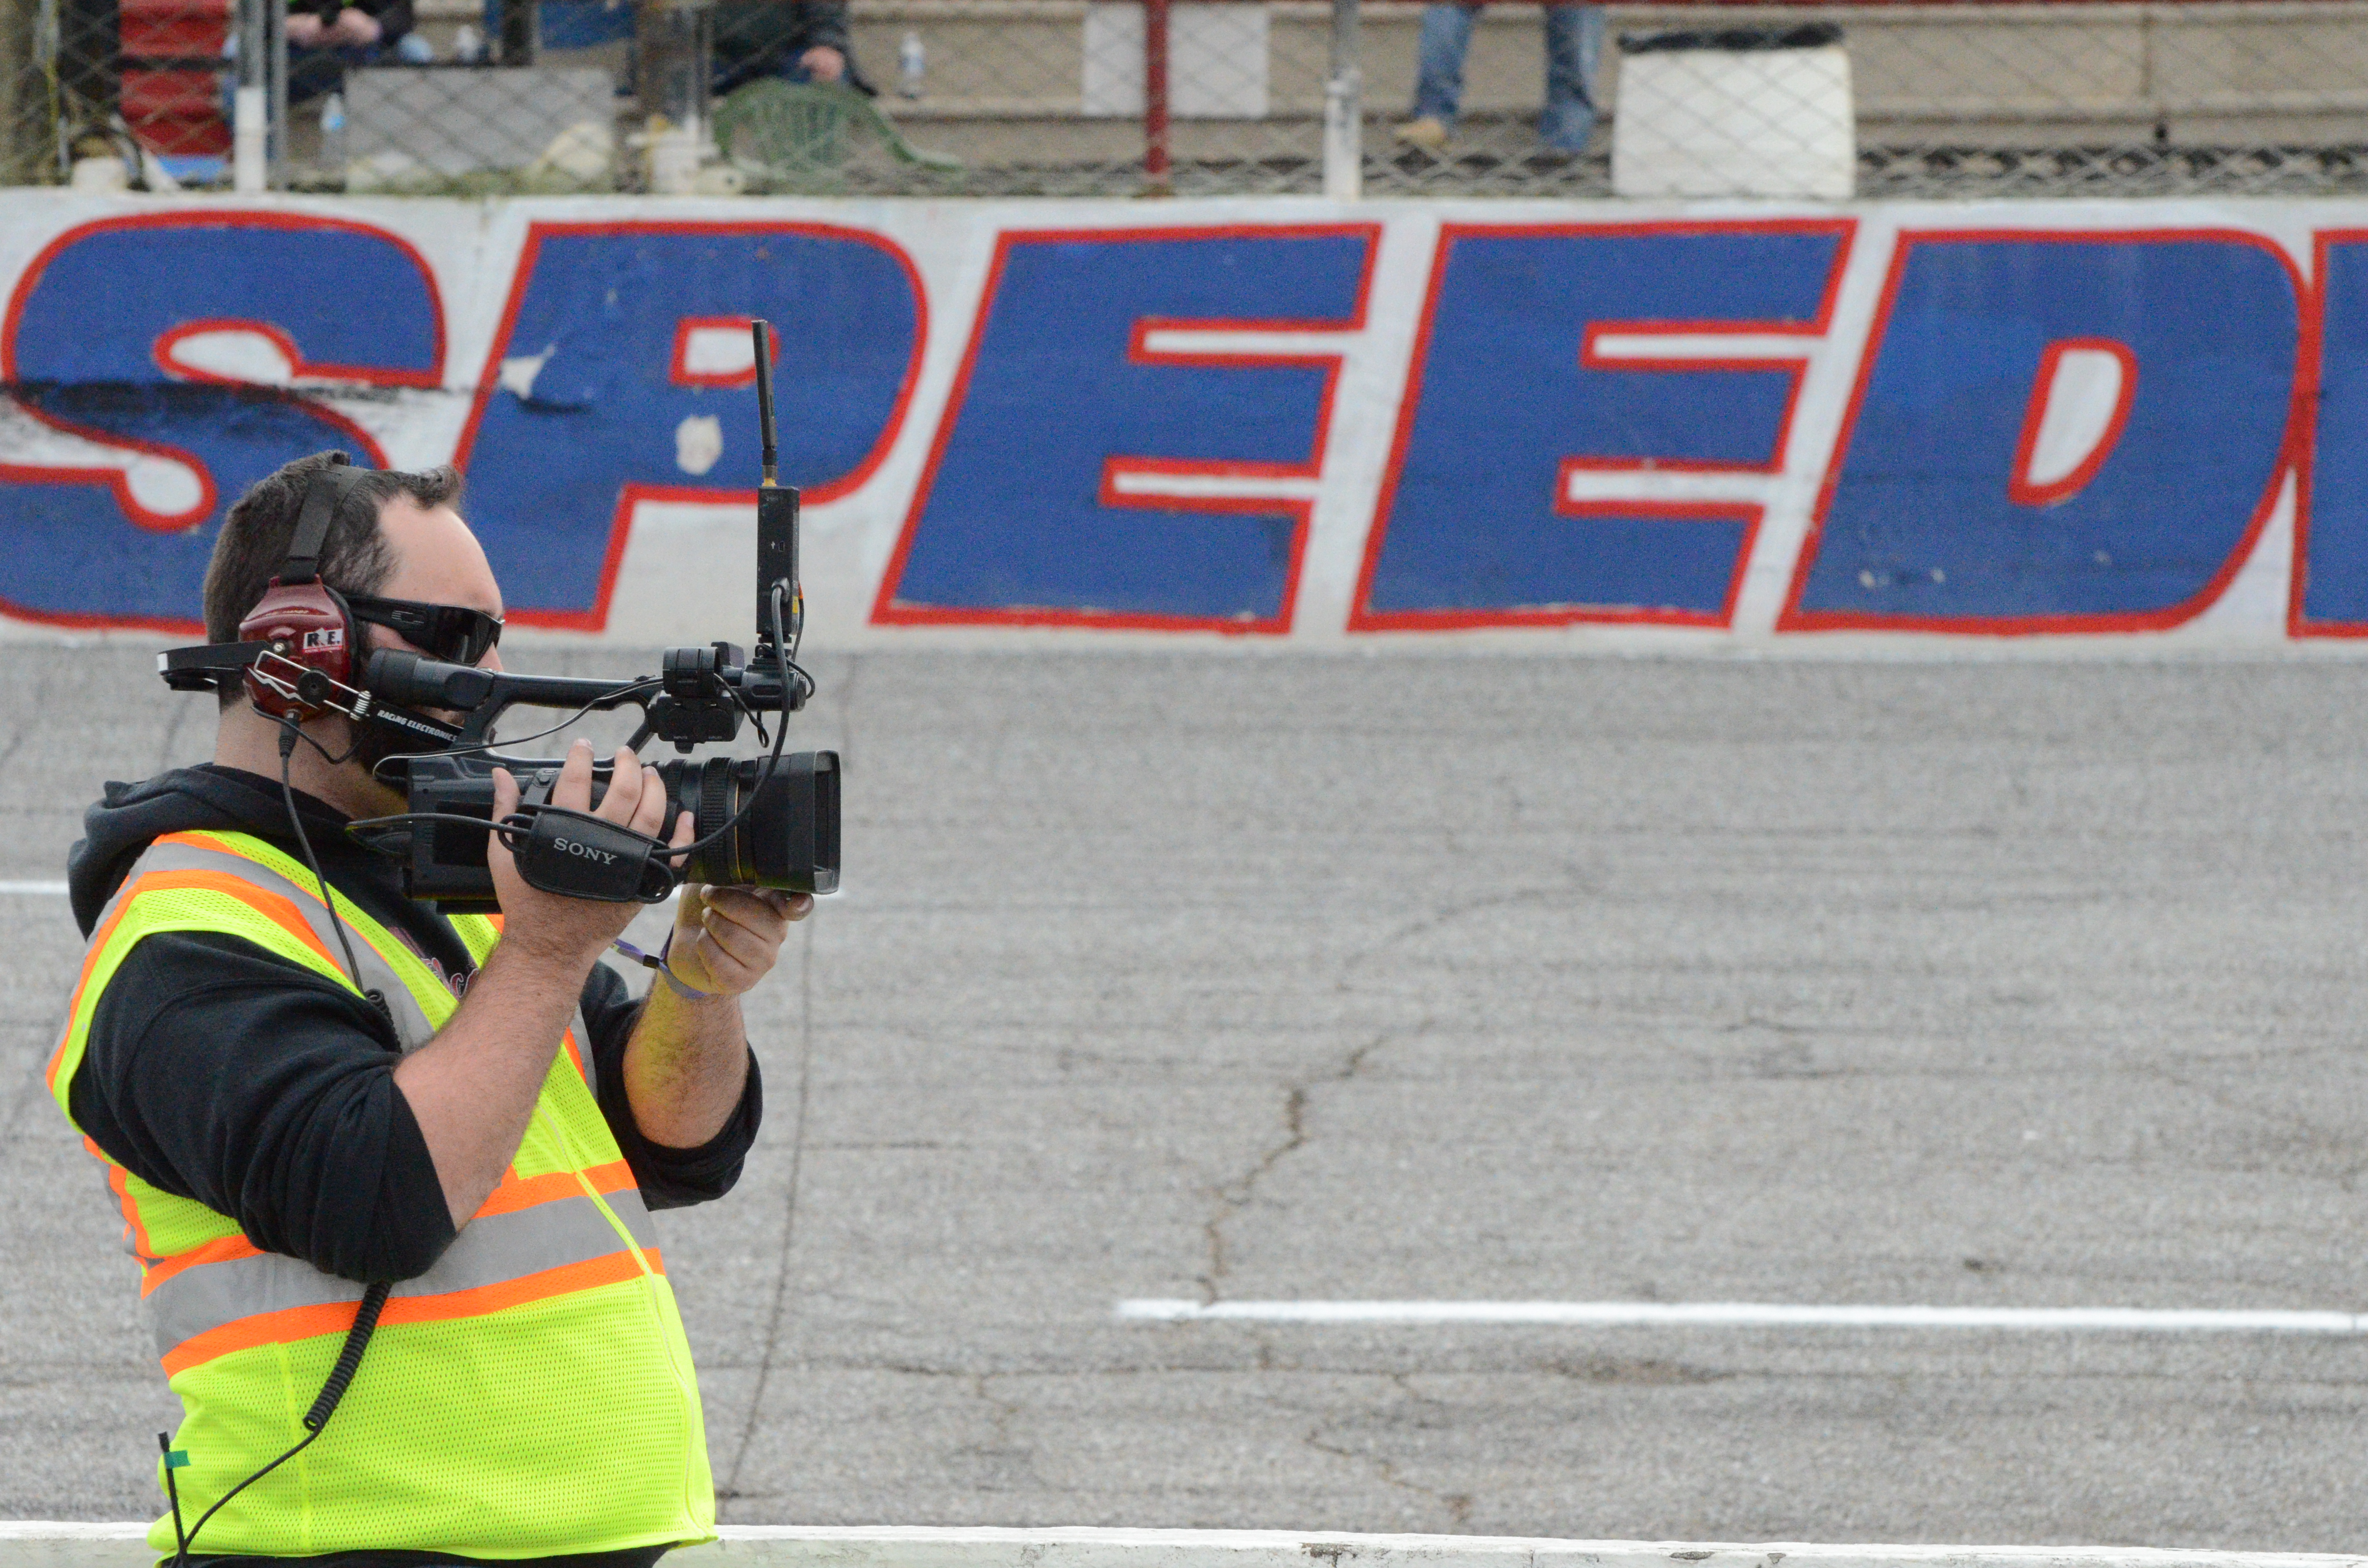 Streaming Information for the 52nd Snowball Derby